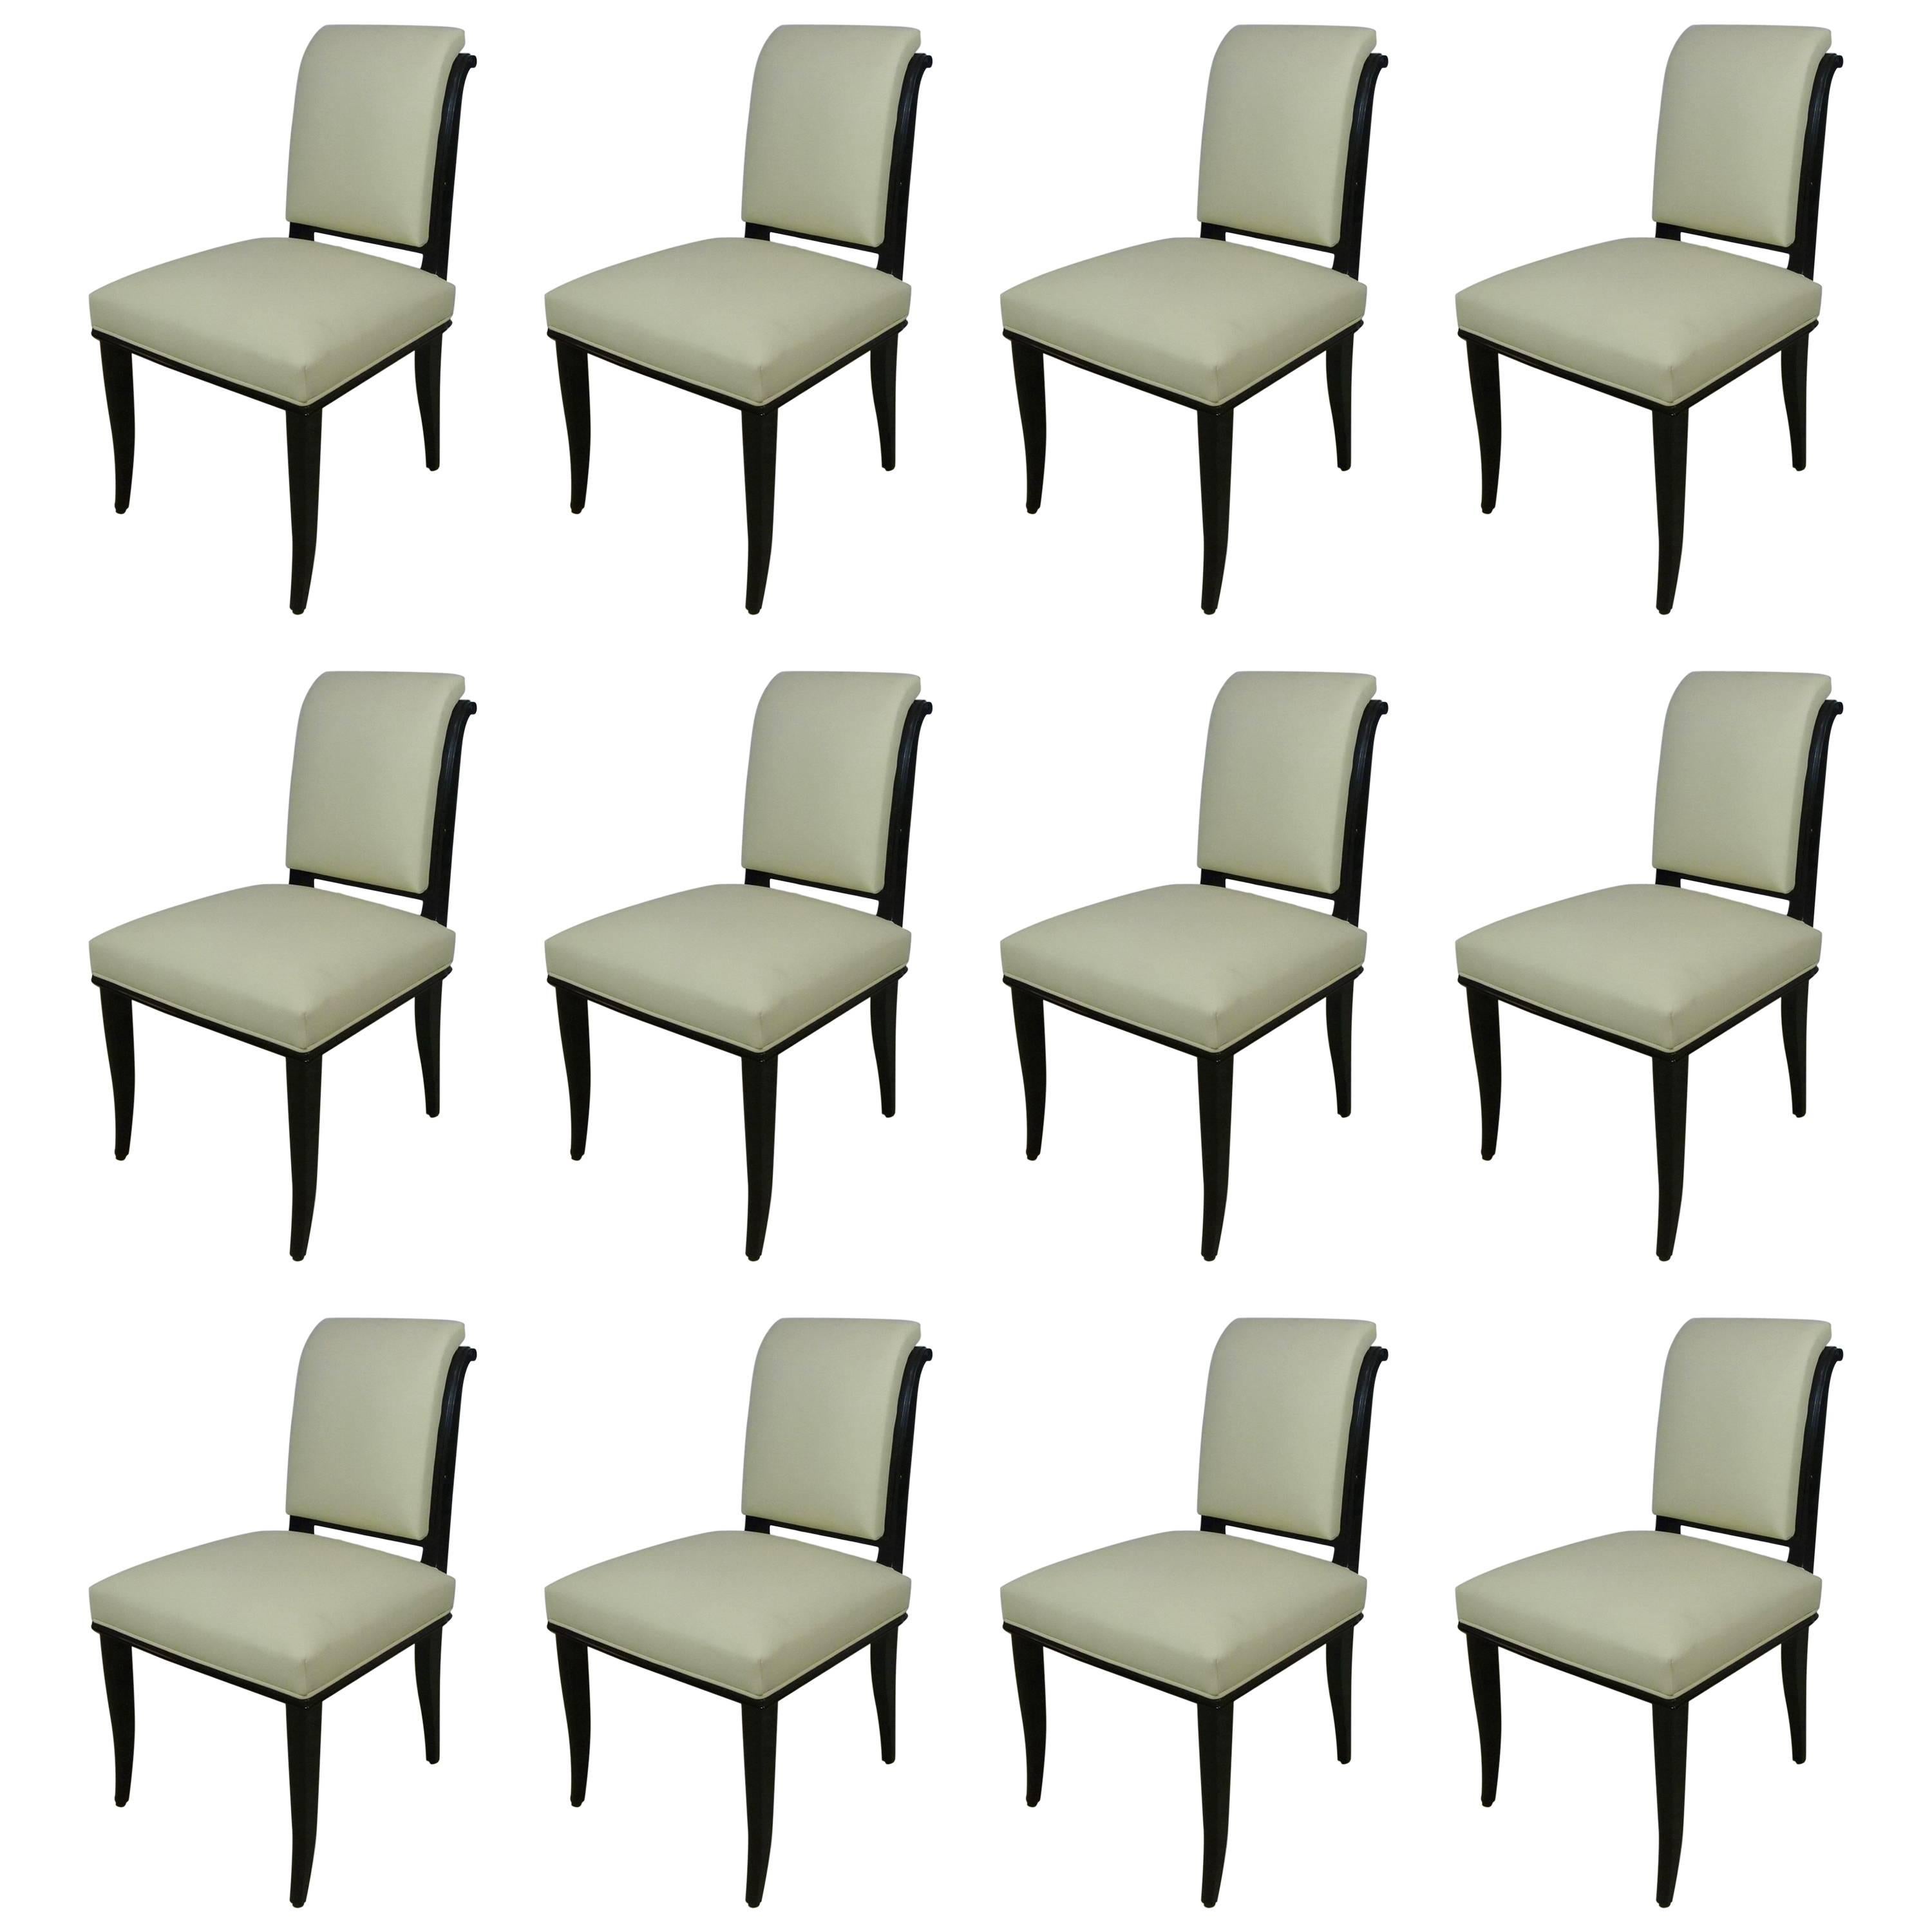 Set of 12 Art Deco Chairs by Alfred Porteneuve